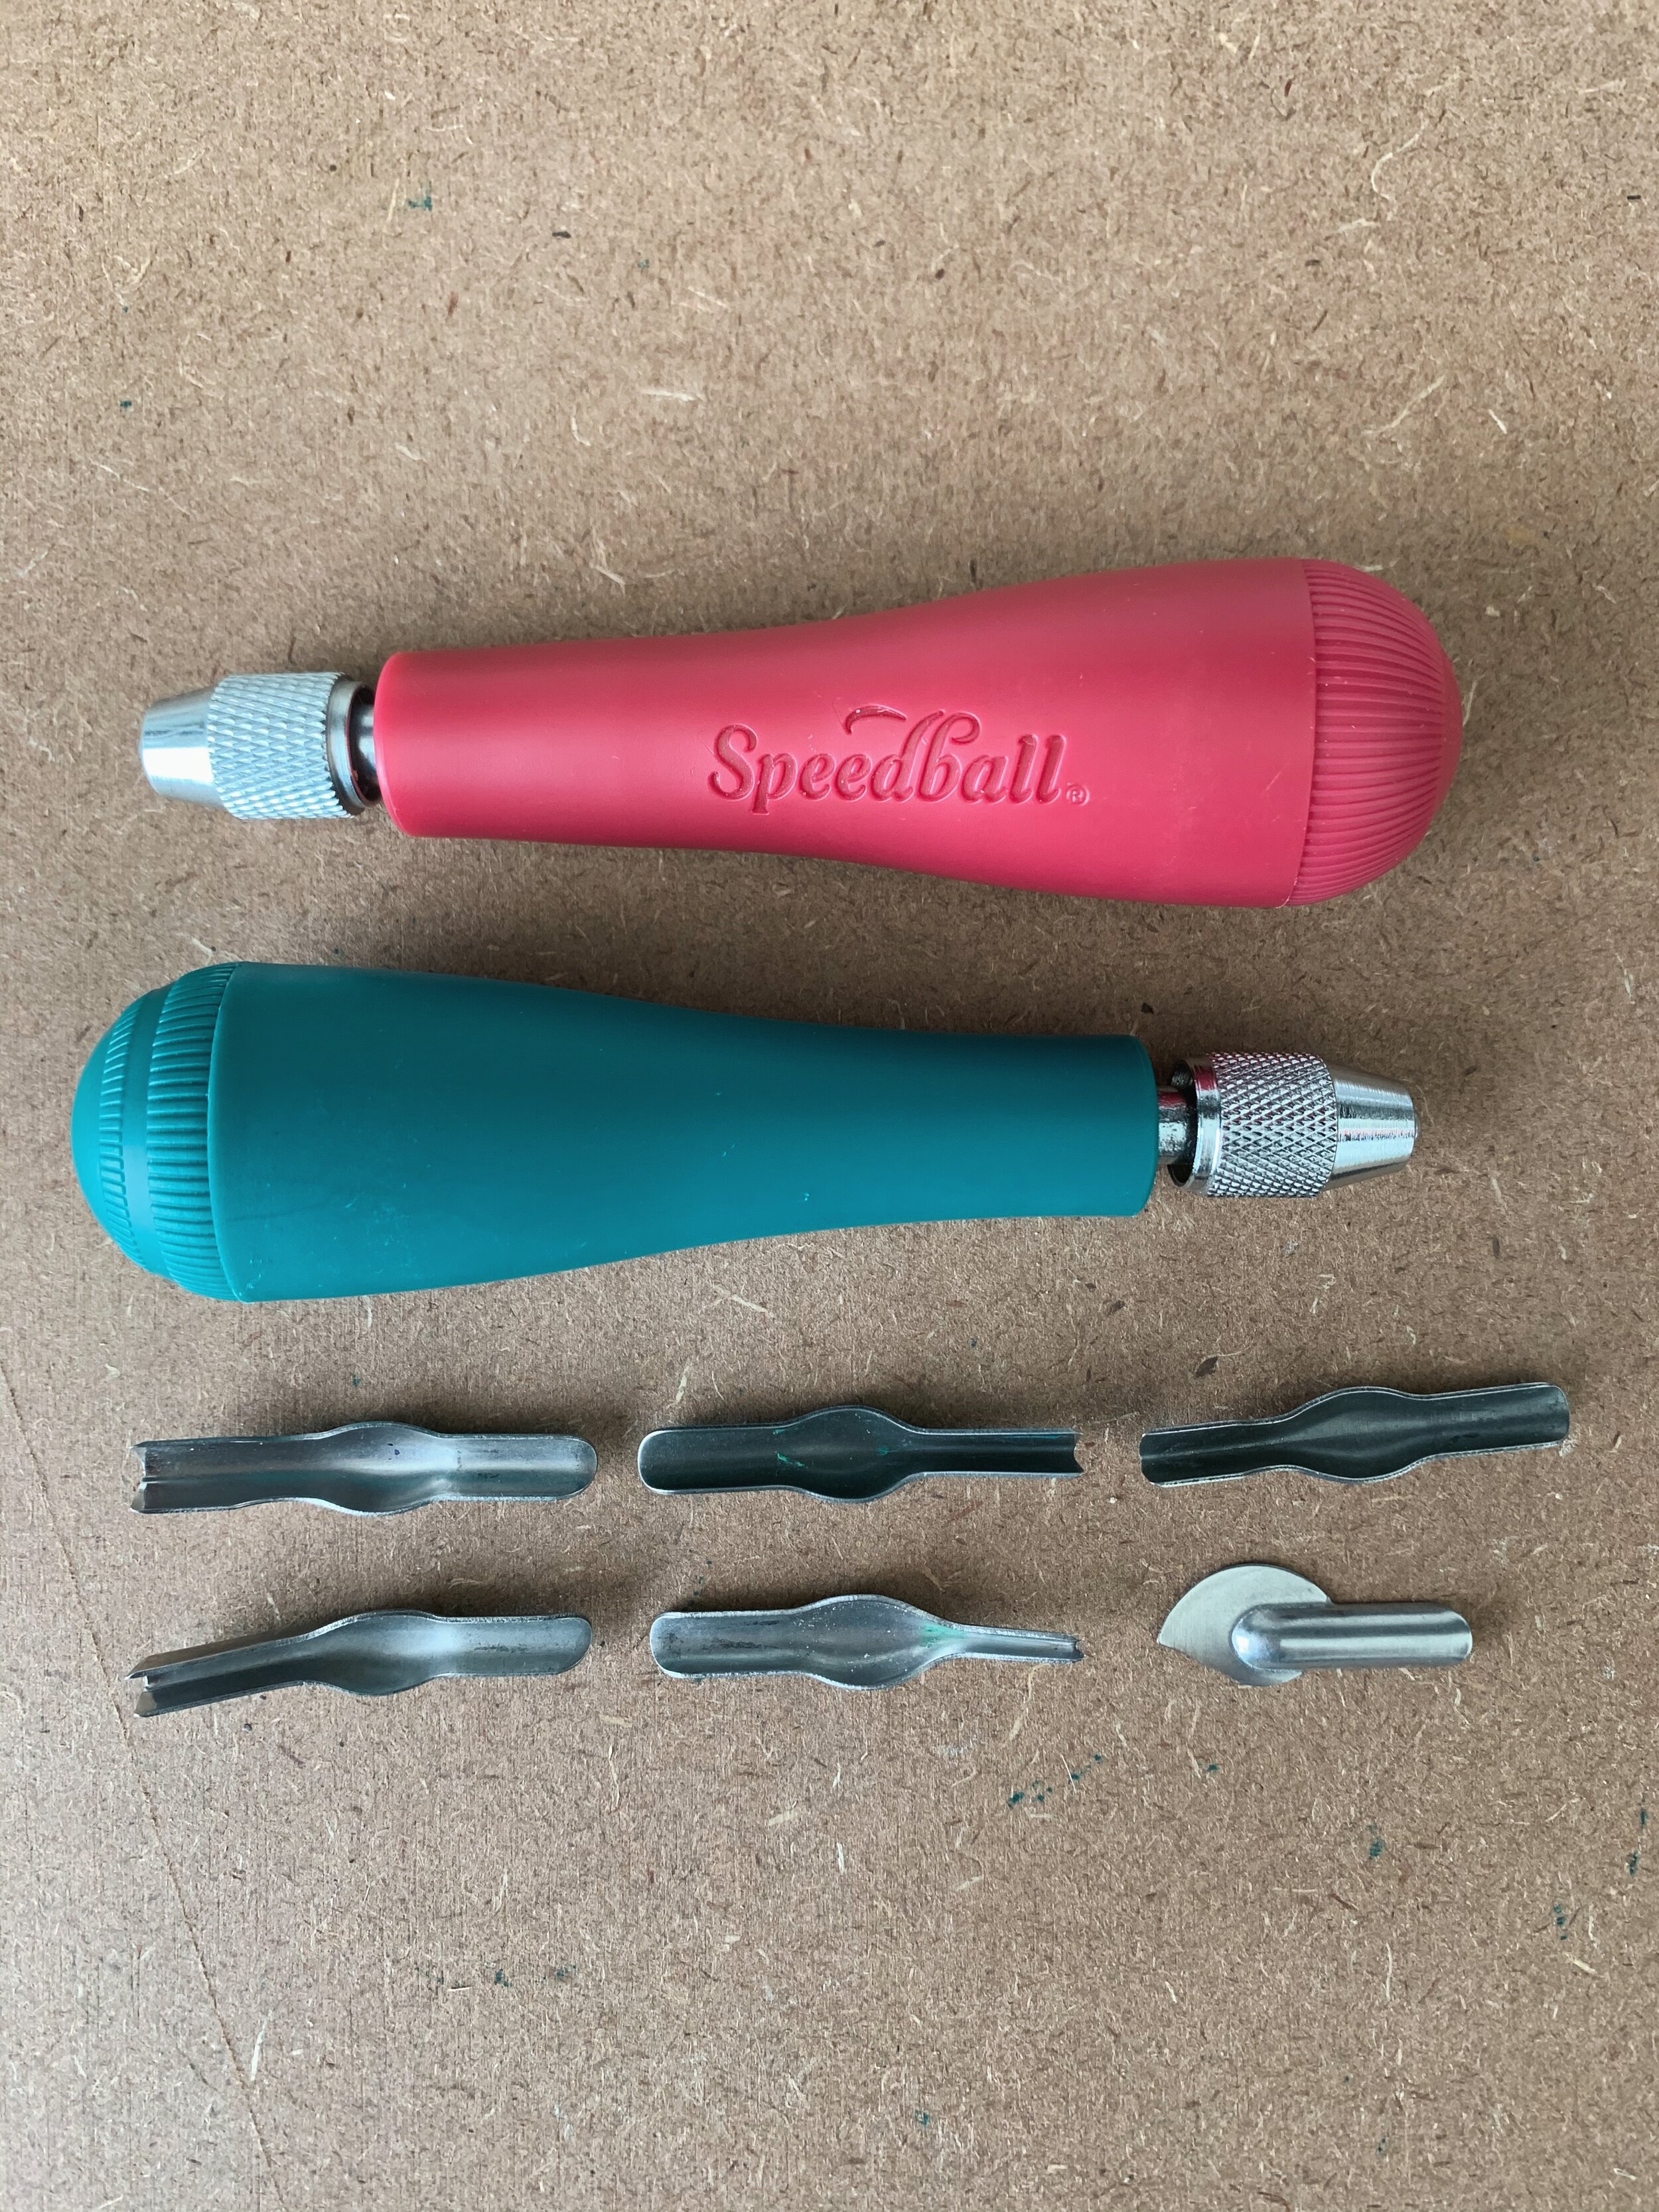 I'm ready to upgrade from my speedball carving tools, any recommendations?  : r/printmaking